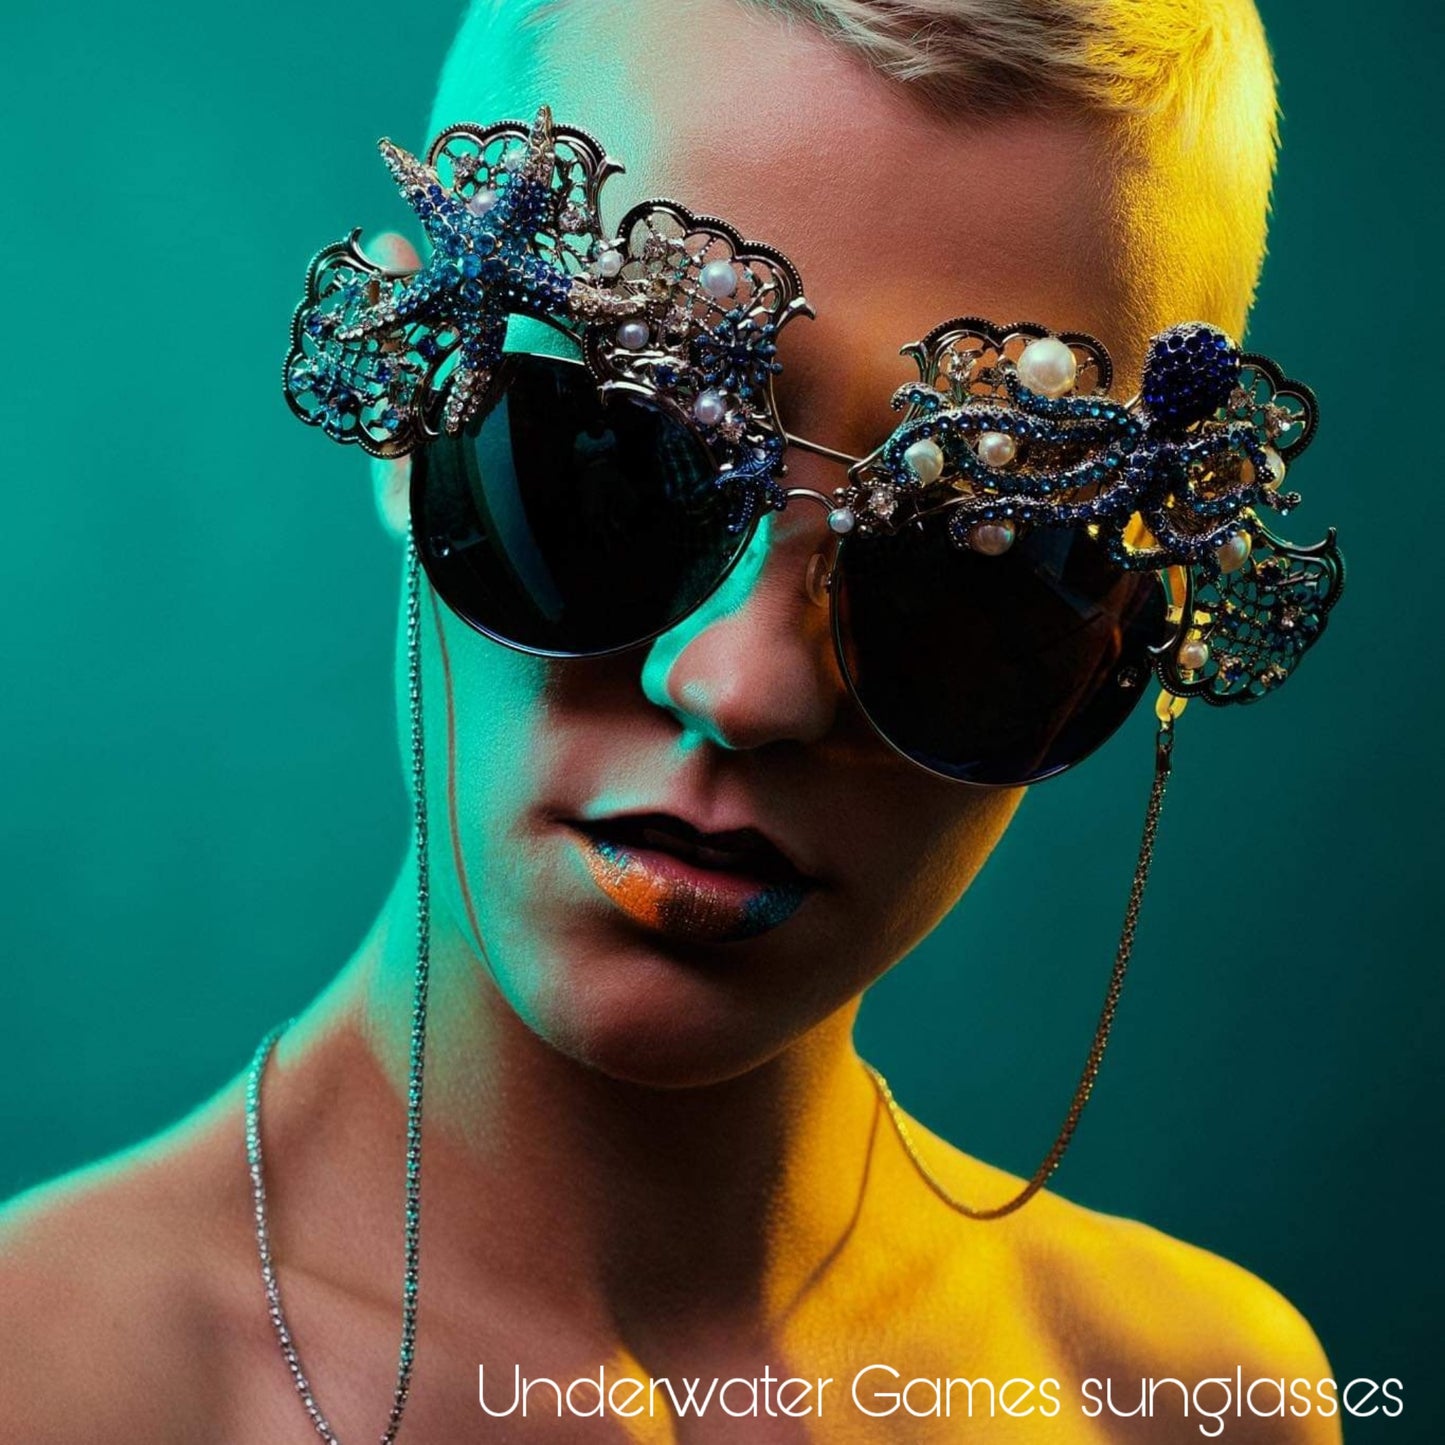 Shifting Depths collection: the Underwater Games showpiece sunglasses